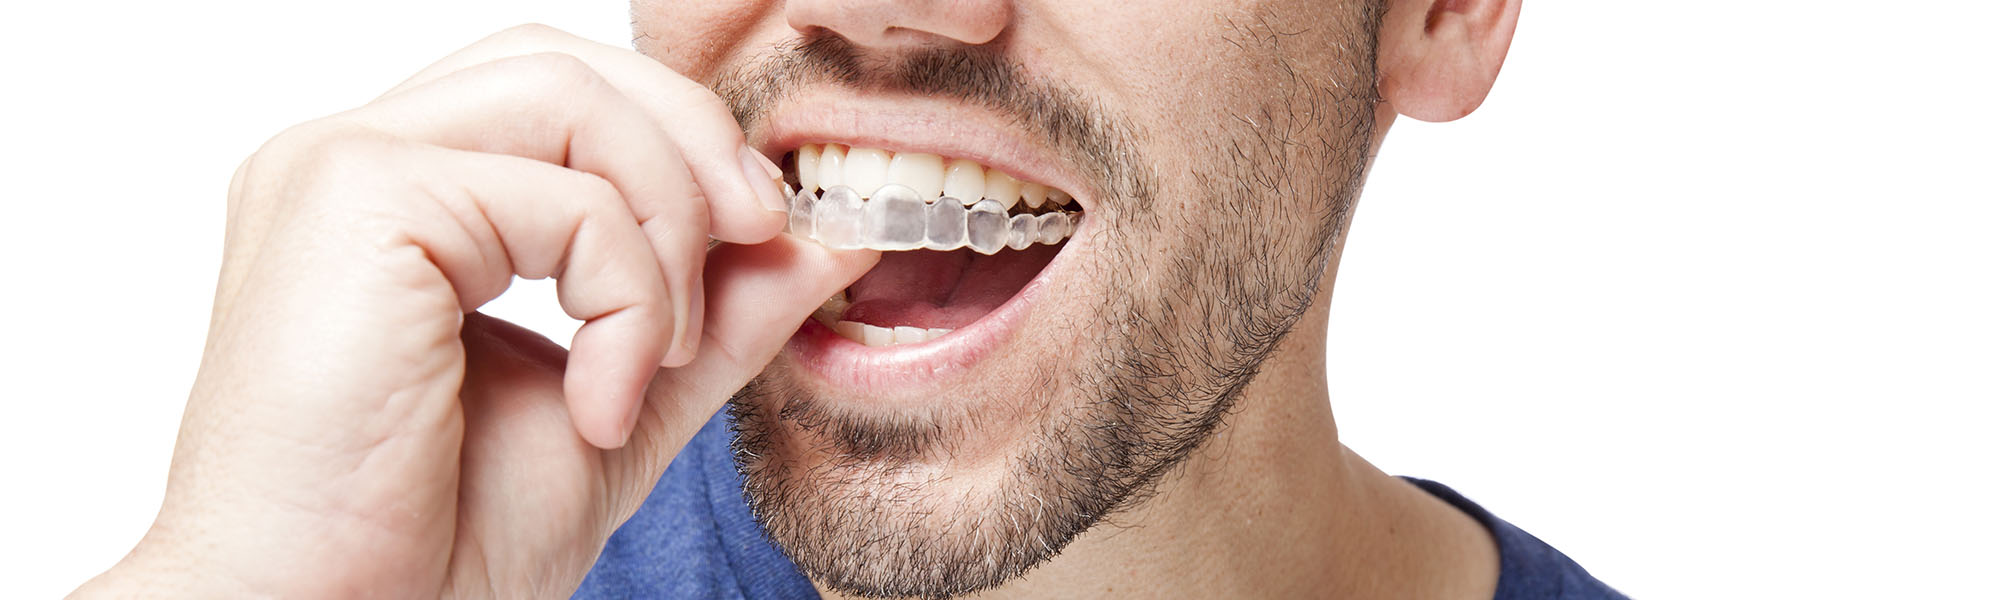 Can clear aligners fix teeth bite issues?